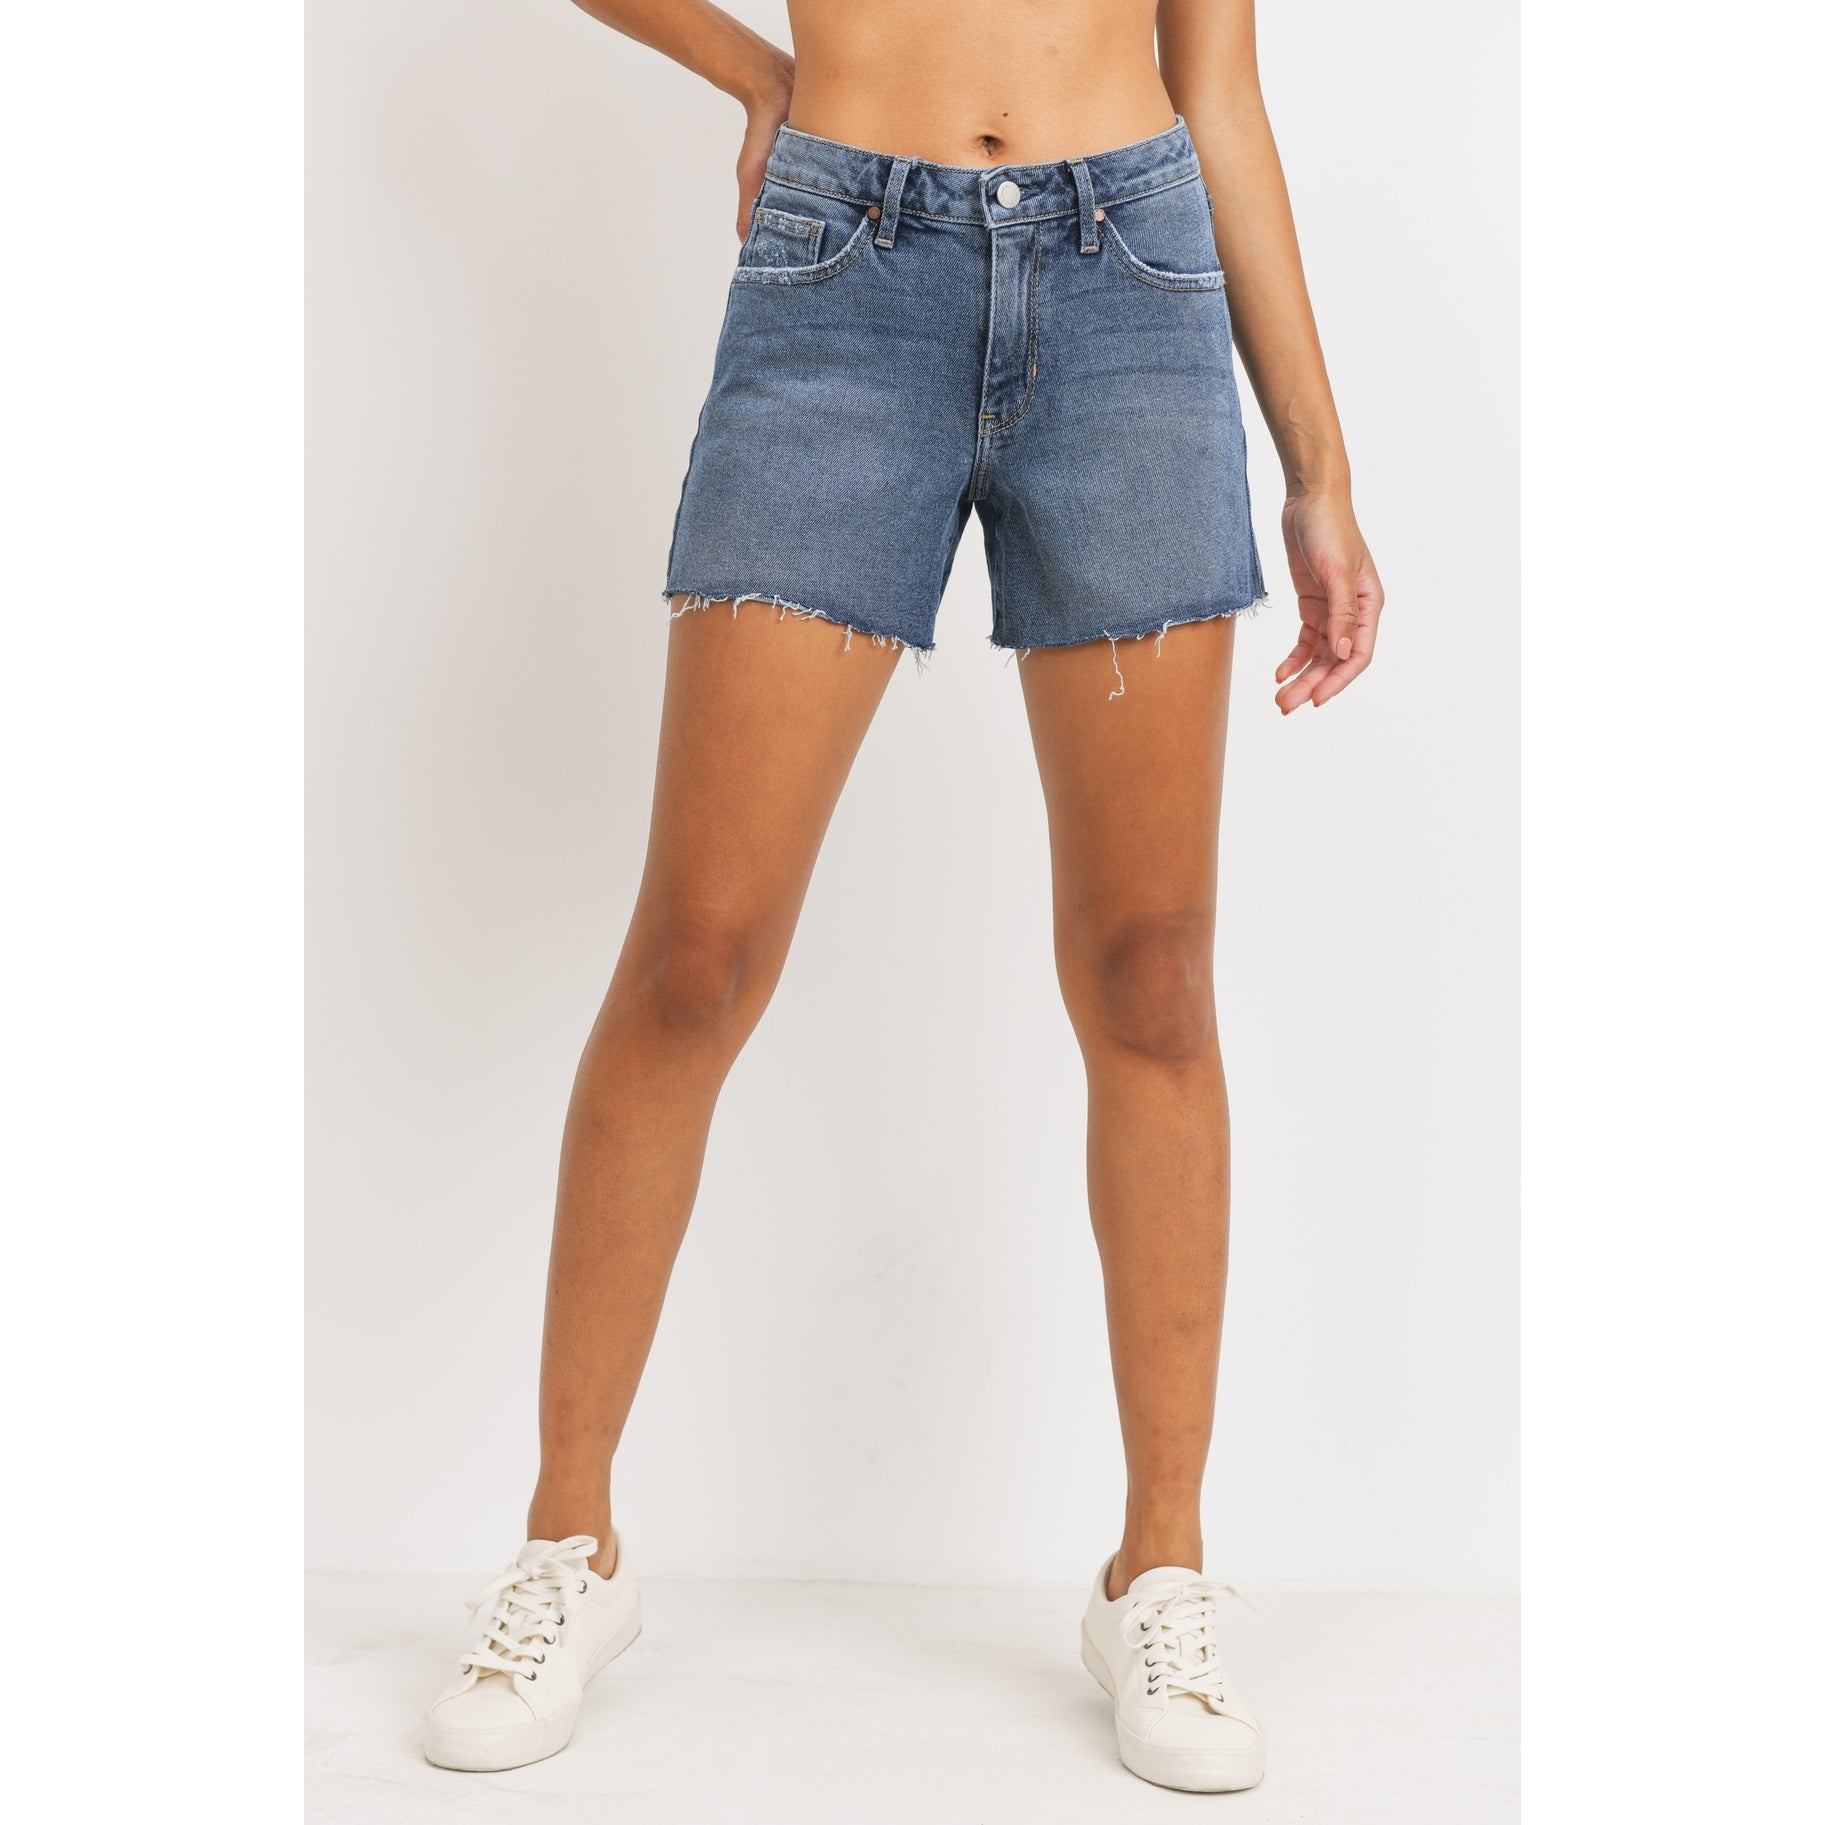 The Channing High Rise A-Line Shorts by Just Black Denim